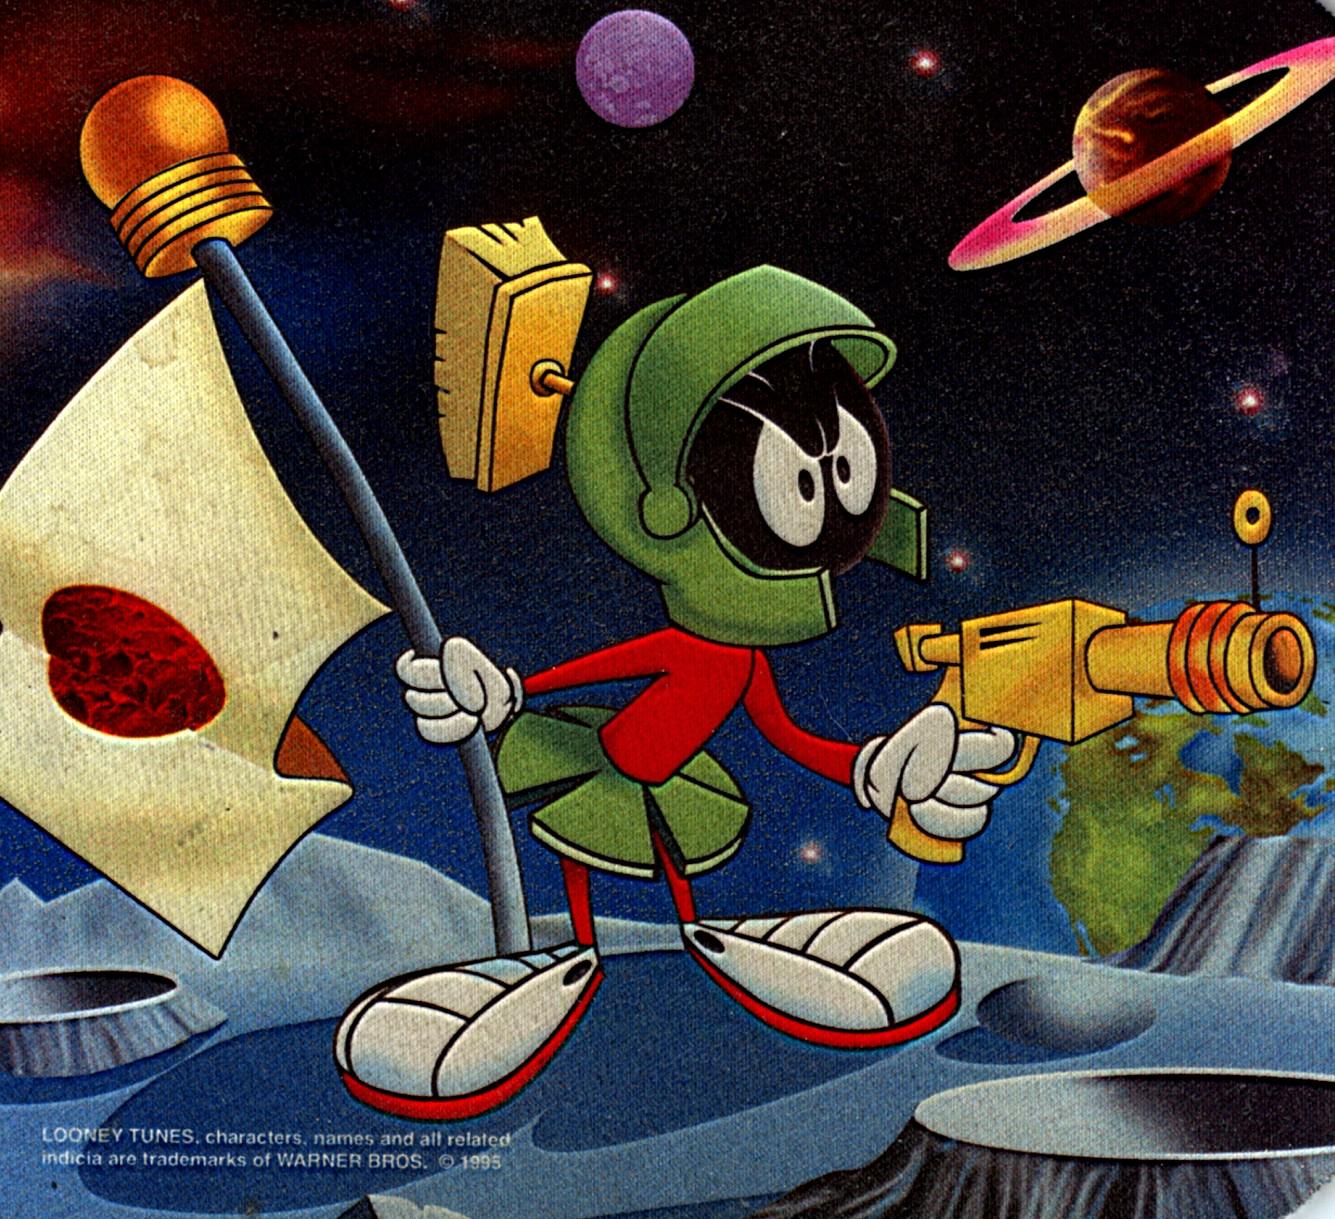 2. Marvin The Martian: MHP